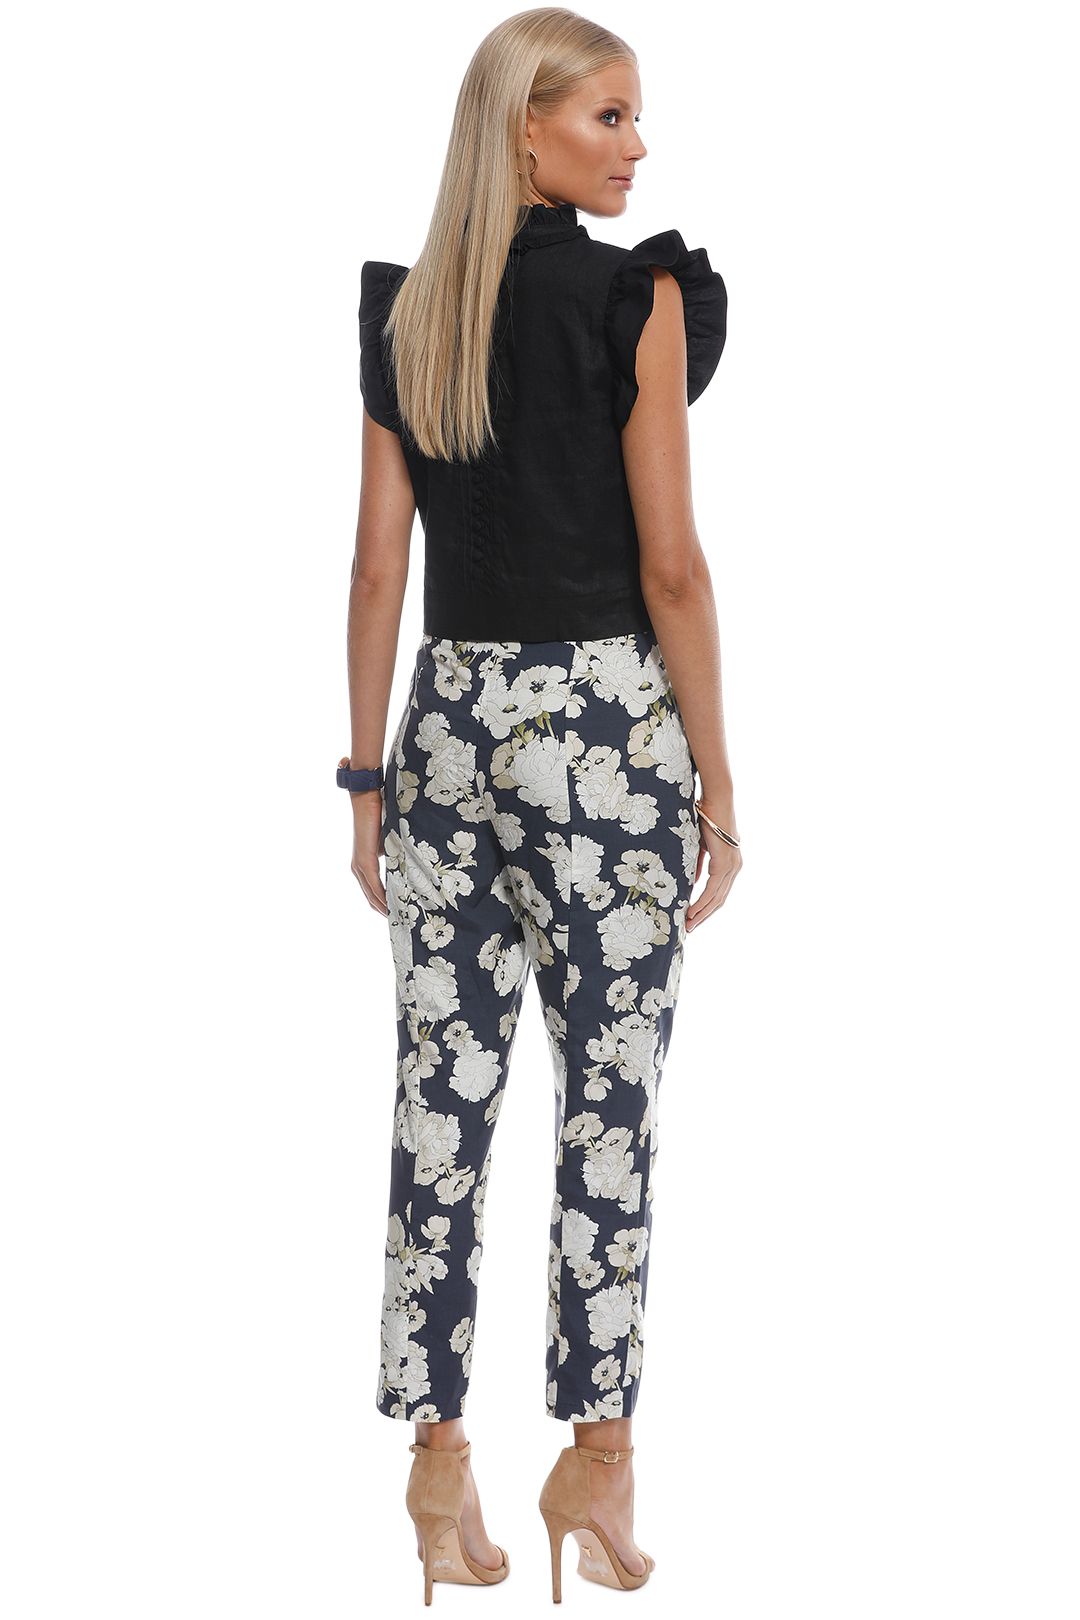 SIR the Label - Bellagio Panelled Pant - Multi - Back